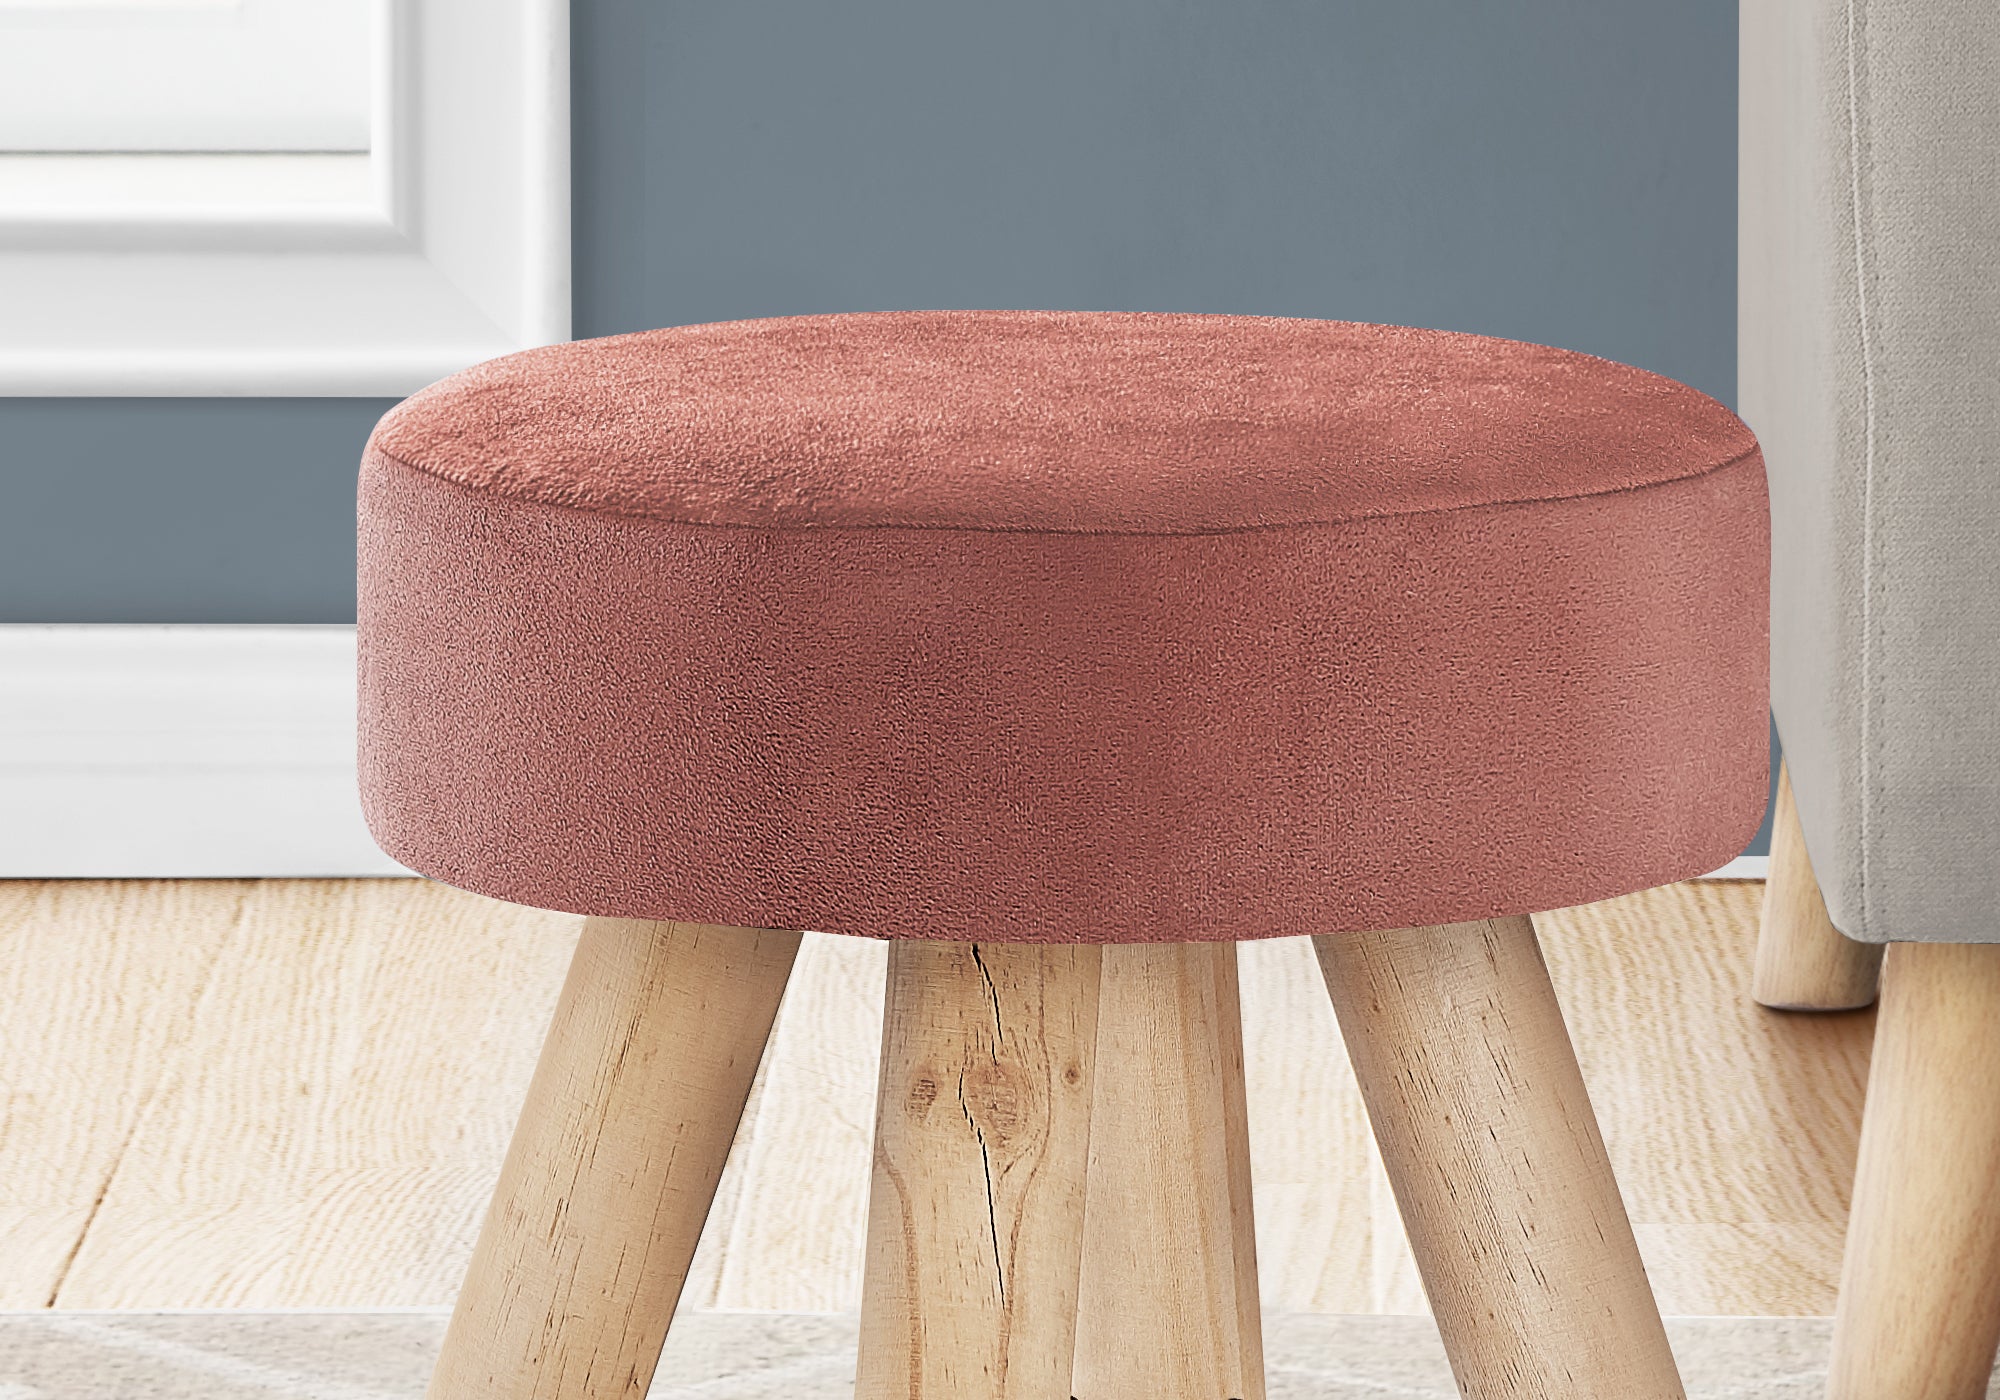 MN-229007    Ottoman, Pouf, Footrest, Foot Stool, 12" Round, Velvet Fabric, Wood Legs, Pink, Natural, Contemporary, Modern